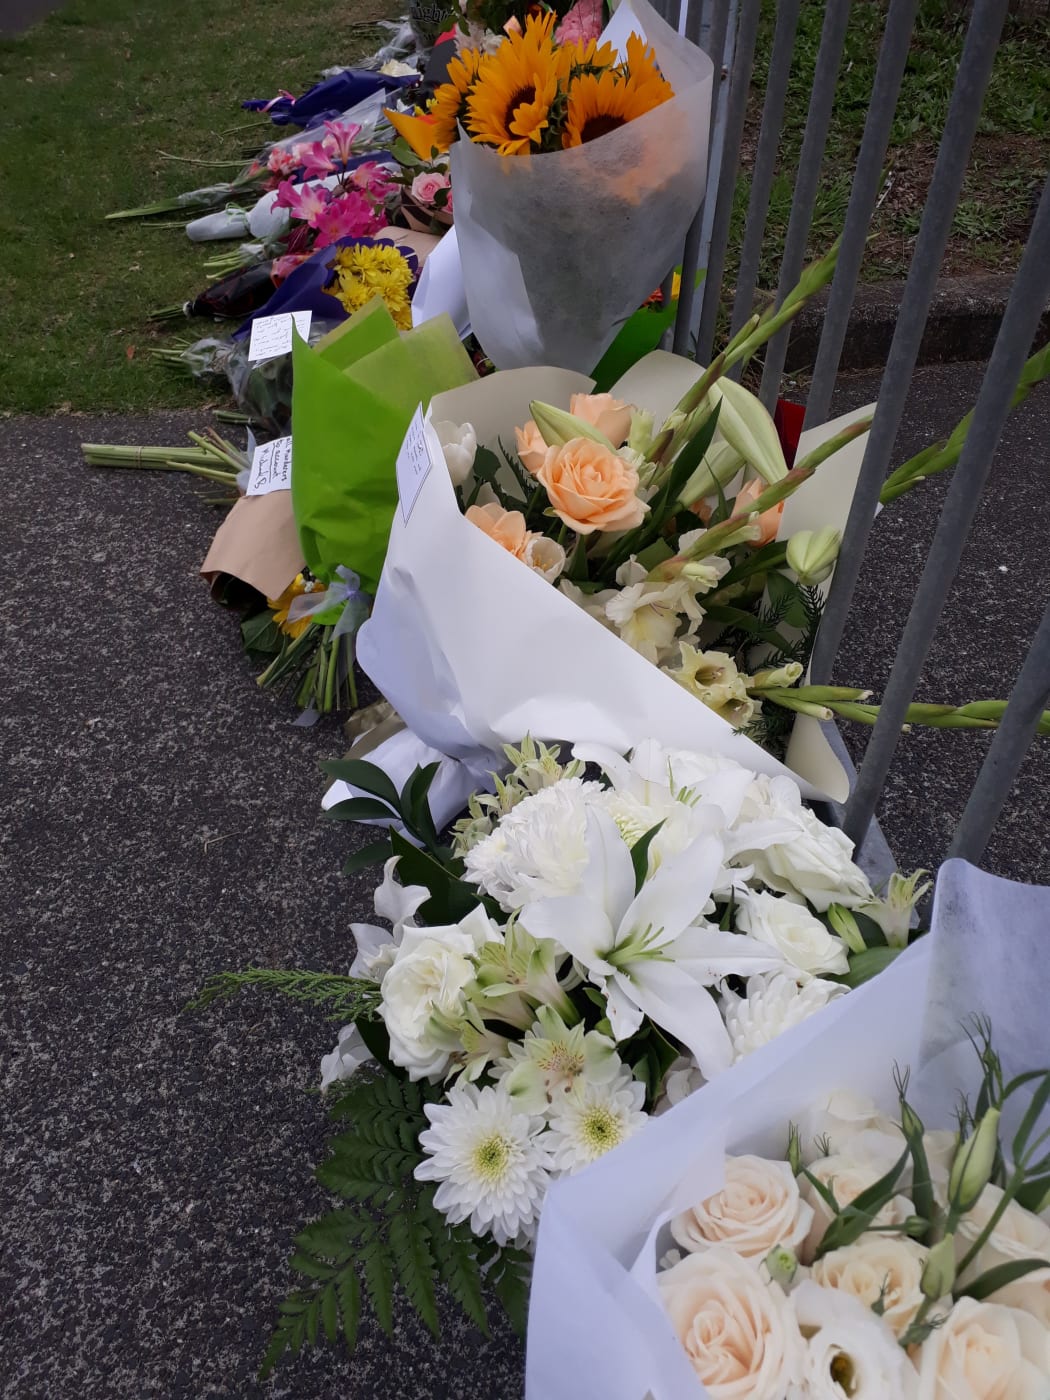 Flowers outside the Masjid e Umar the day after the Christchurch mosque shootings